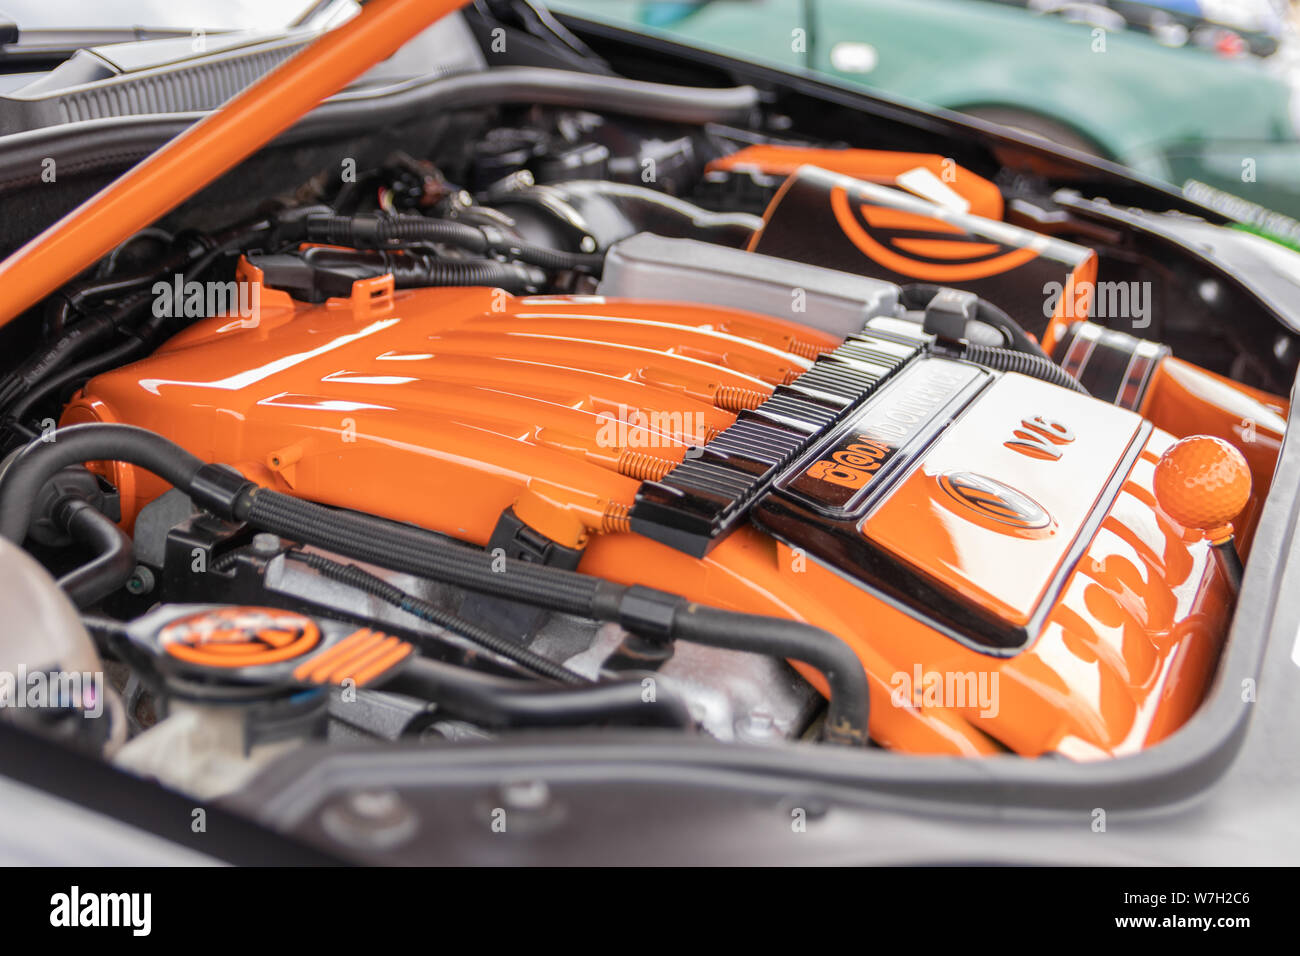 A close up of an orange Volkswagen or VW motor car engine which has been tuned up Stock Photo